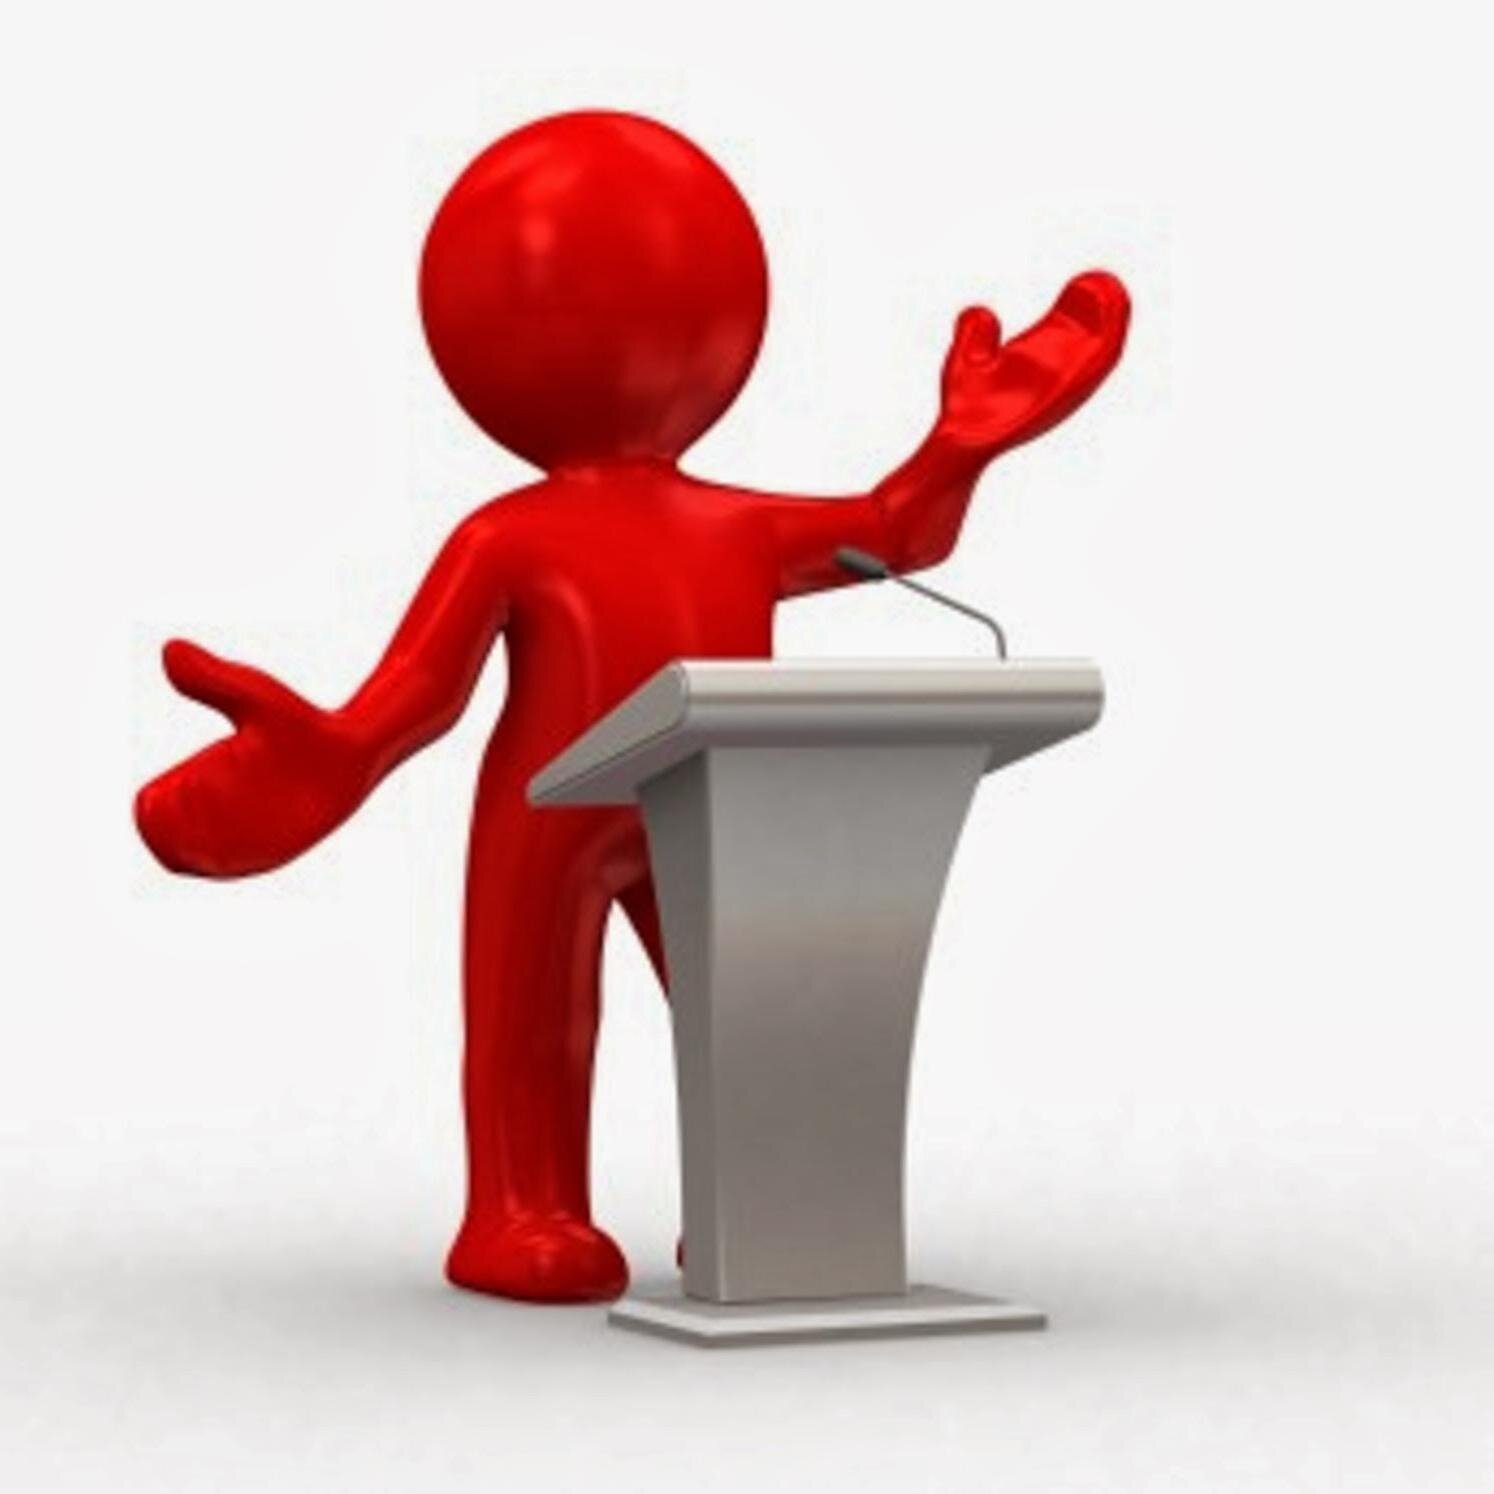 Tips, tricks, information, resources and everything you need to know about Public Speaking.